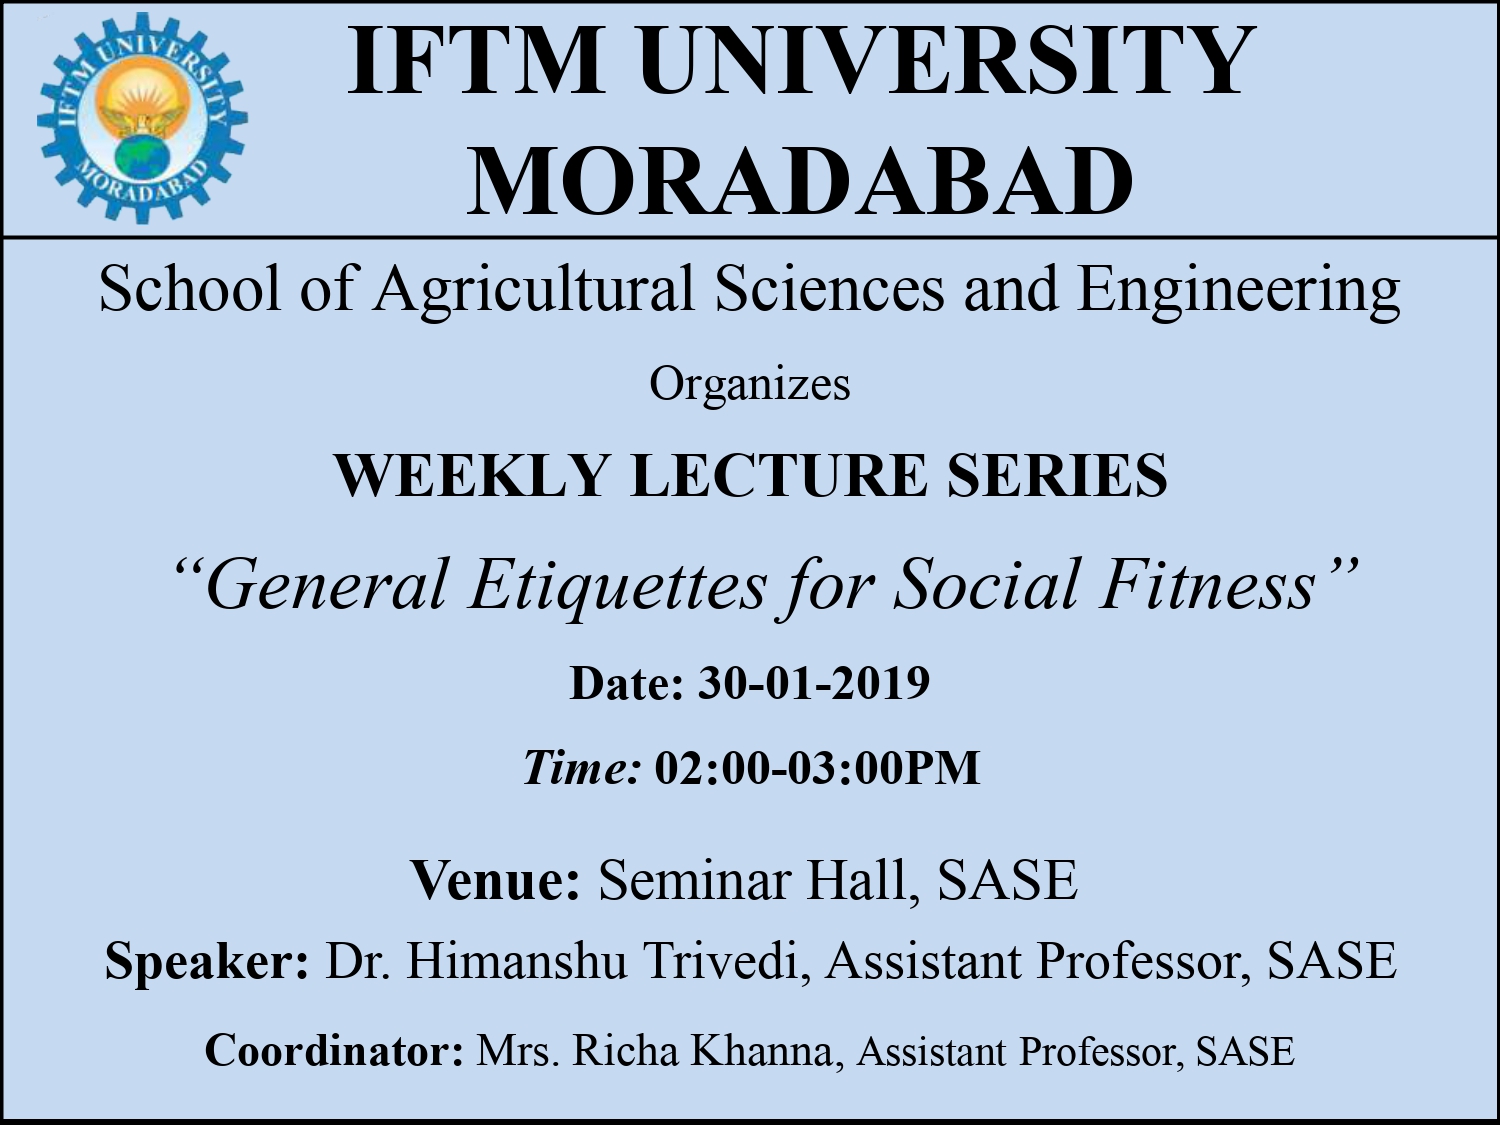 Weekly Lecture Series: “General Etiquettes for Social Fitness”